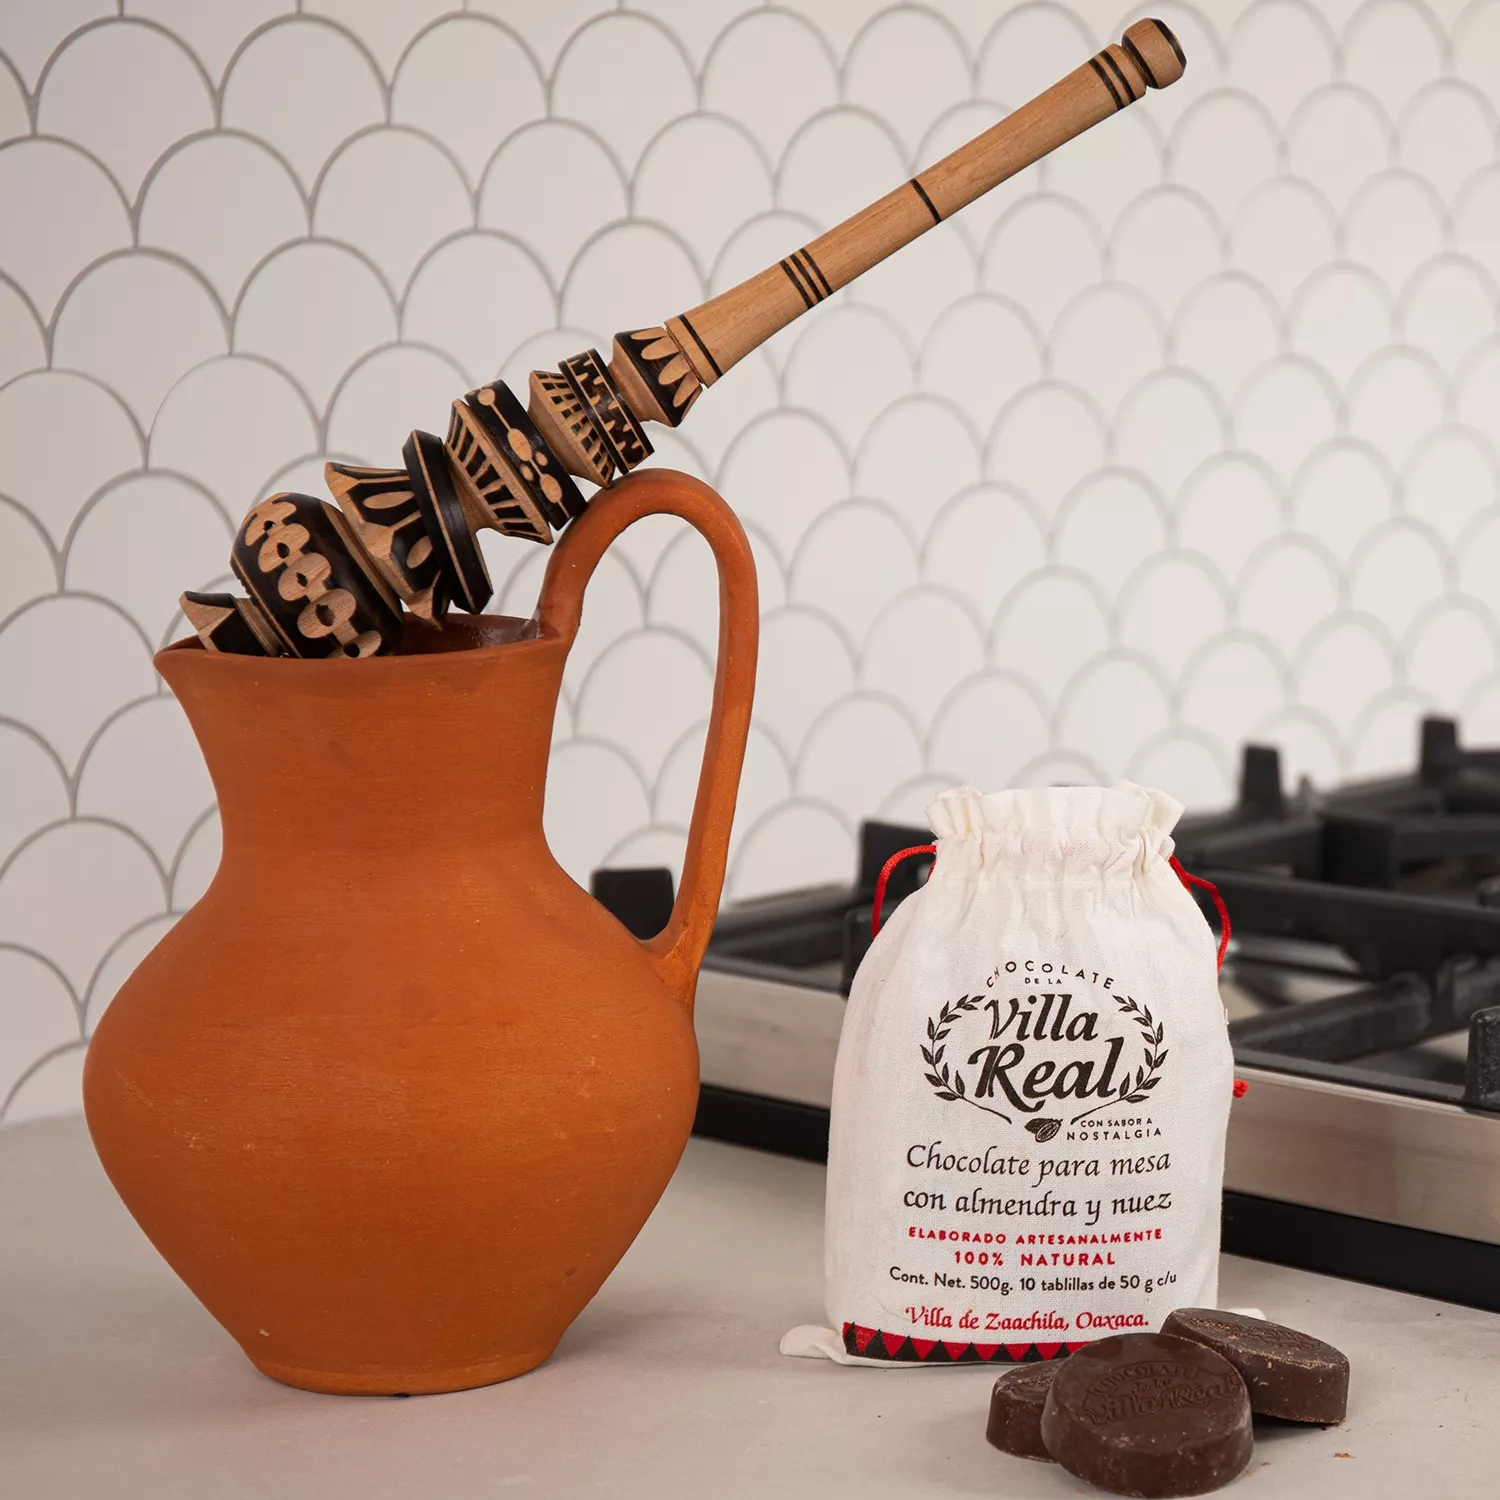 Traditional Molinillo Mexican Hot Chocolate Whisk by Verve Culture